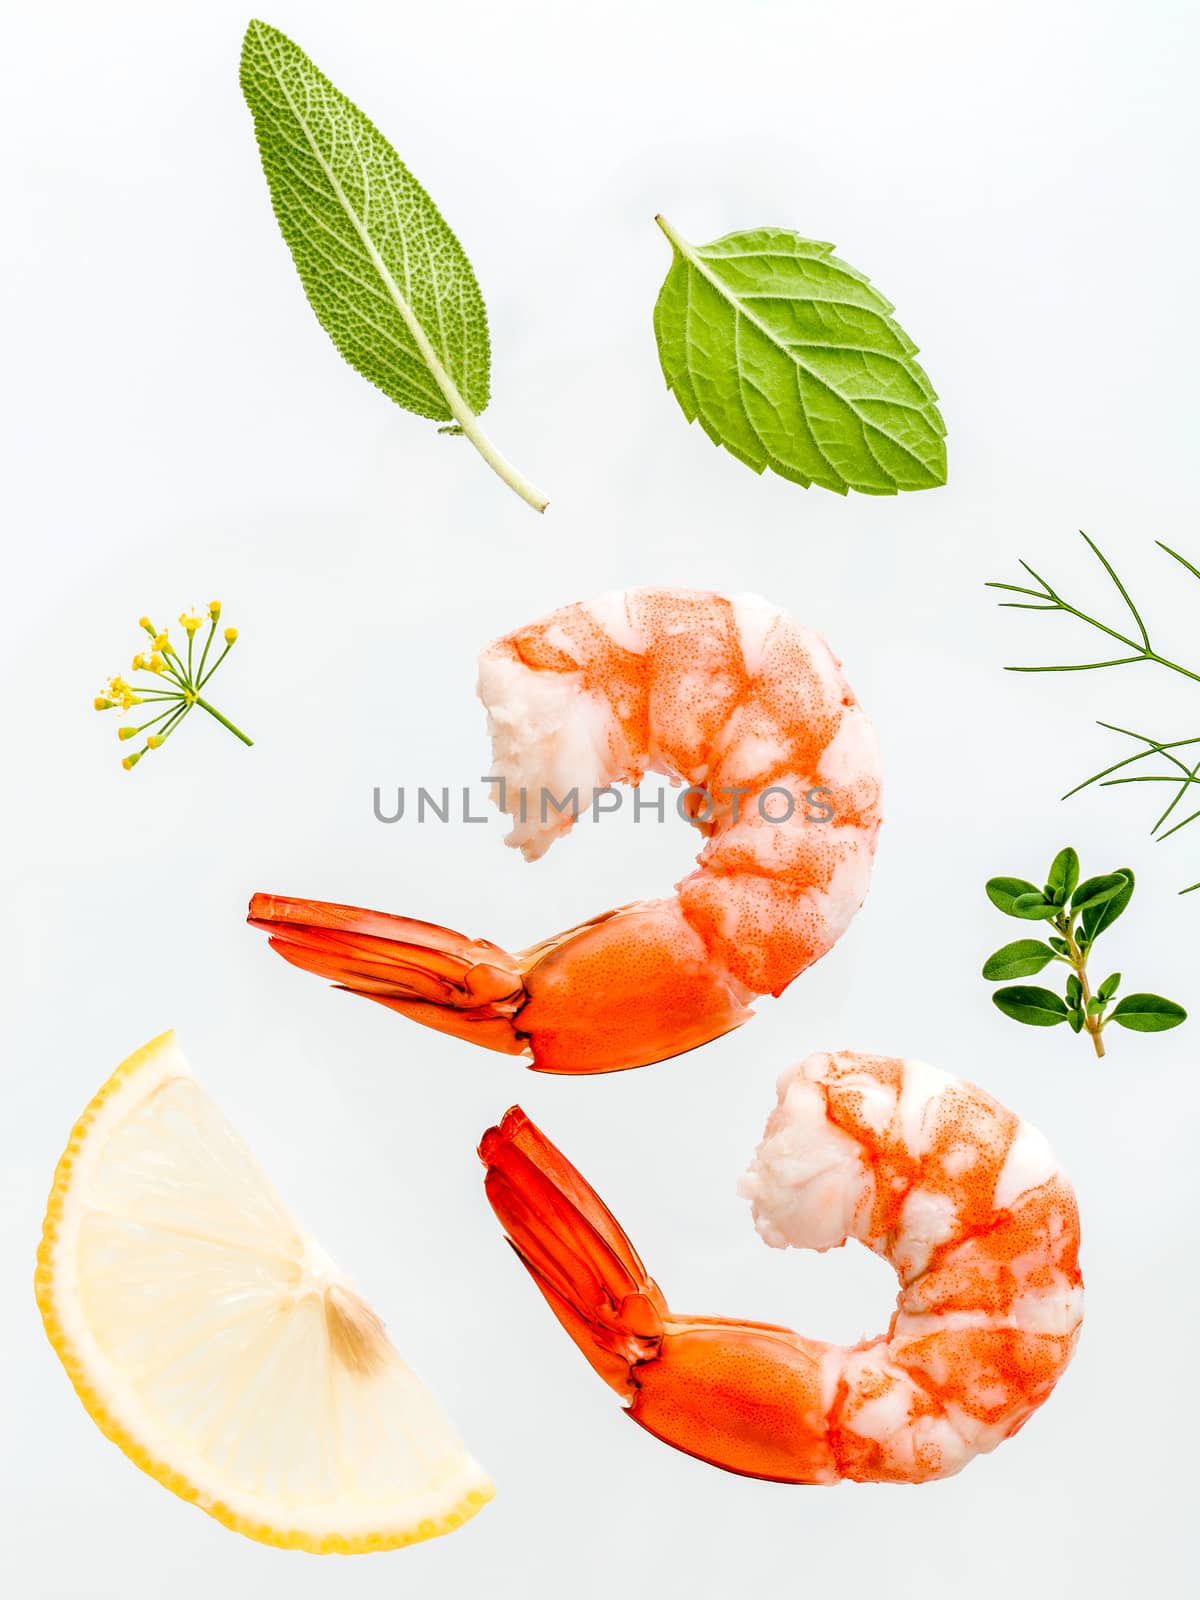 Fresh steamed shrimp isolate on white background. Boiled prawns with ingredients. Boiled prawns with herbs Fennel ,parsley,rosemary,lemon and mint with fork isolate on white background.